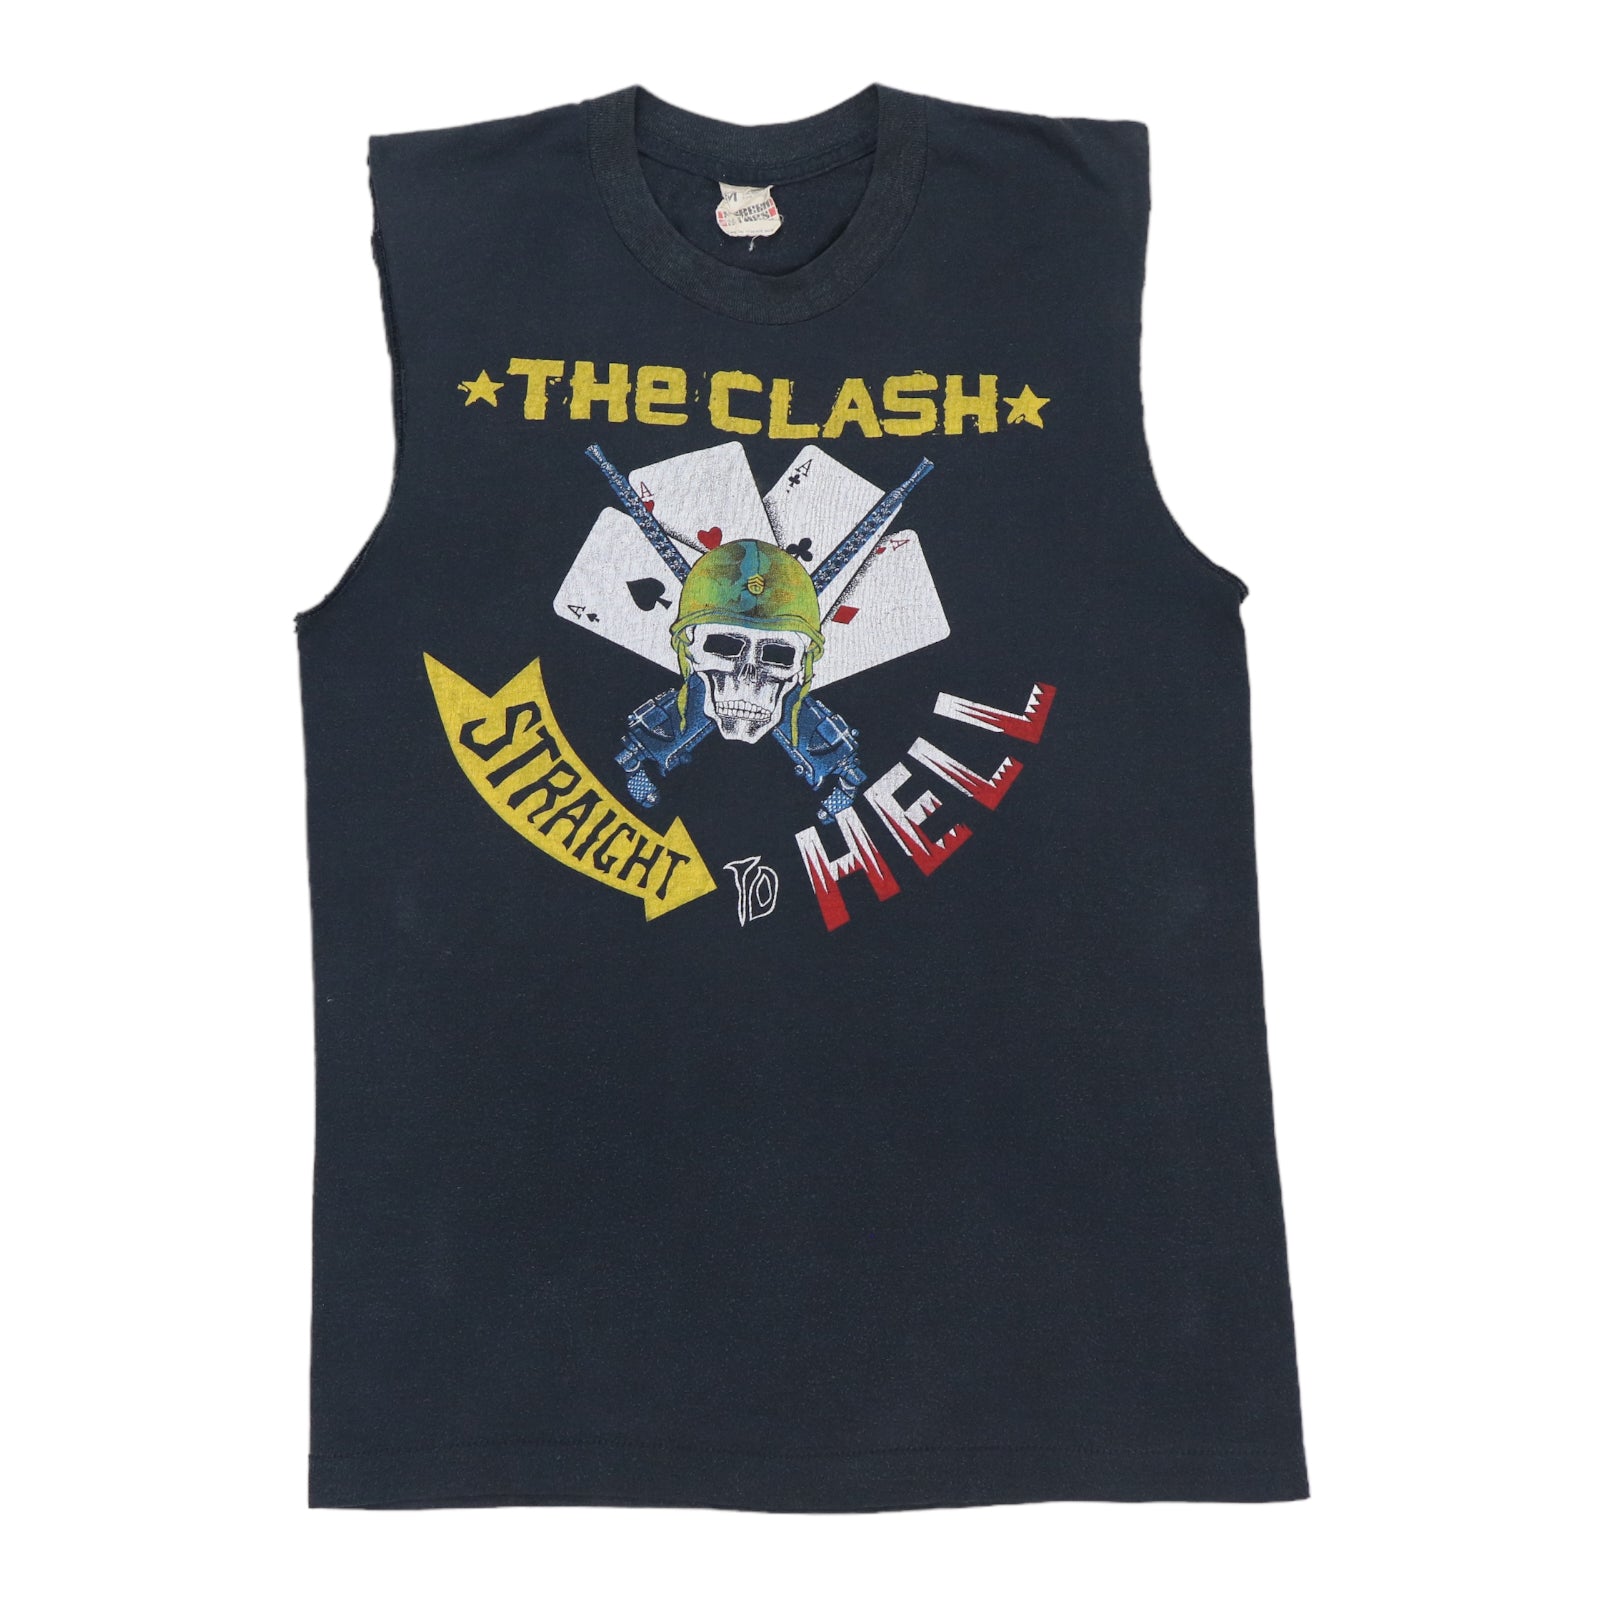 1982 The Clash Combat Rock Straight To Hell Shirt